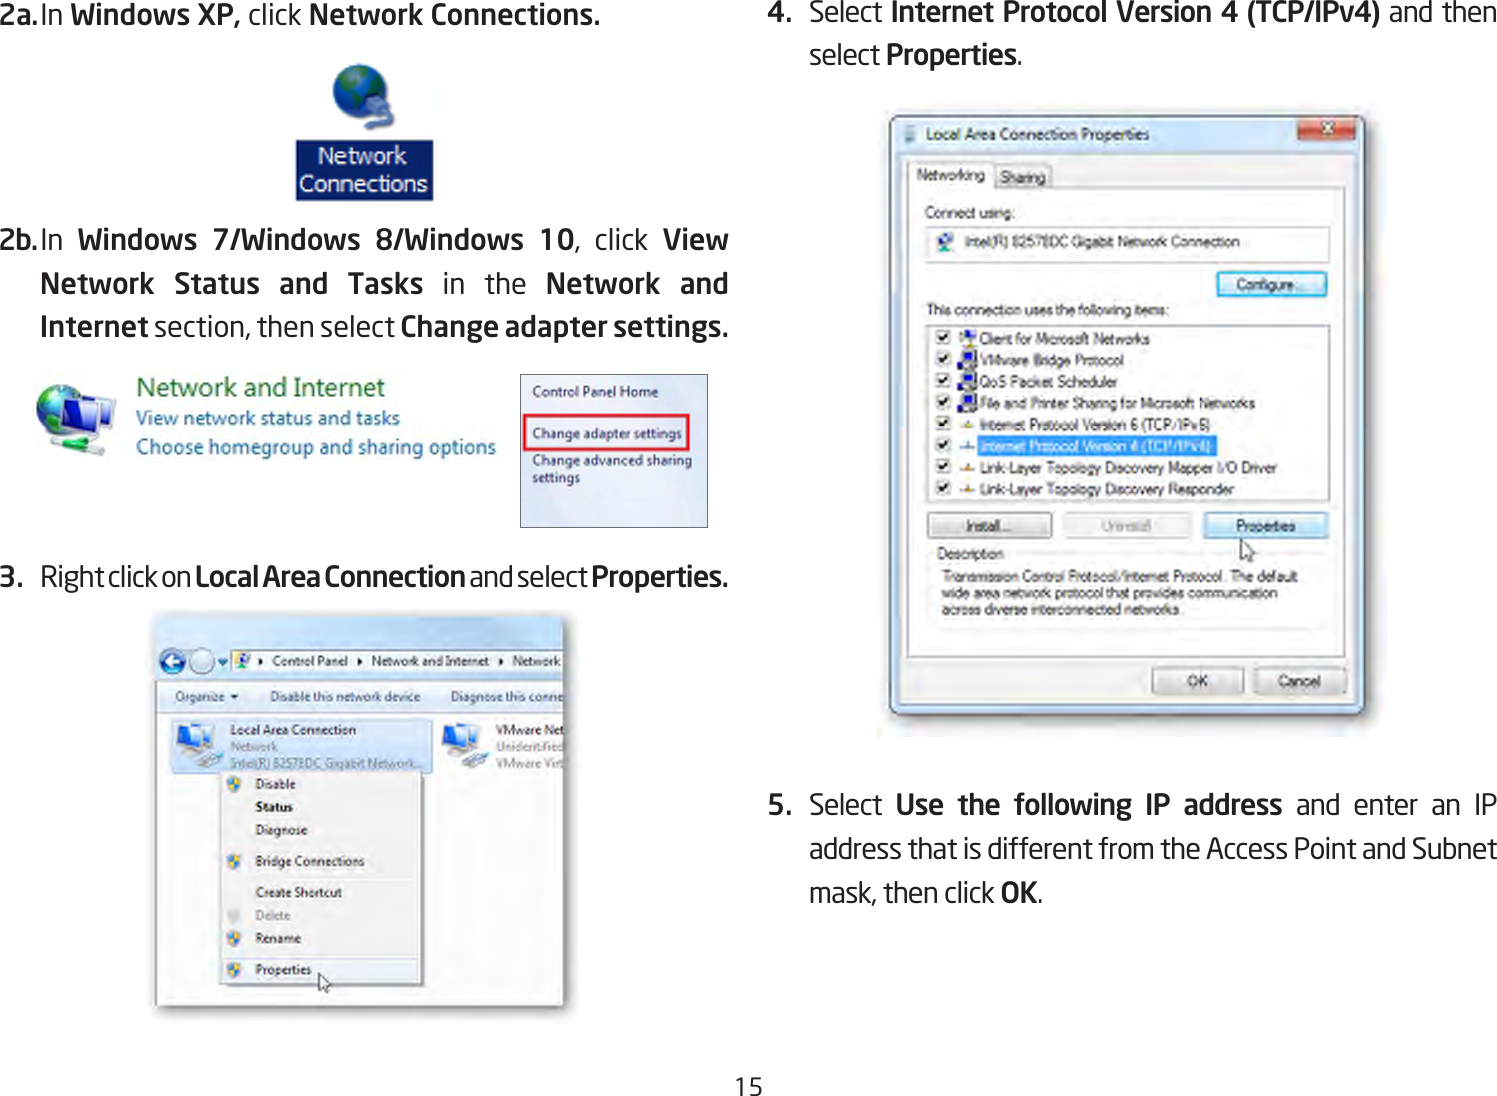 152a. In Windows XP, click Network Connections. 2b. In  Windows 7/Windows 8/Windows 10, click View Network Status and Tasks in the Network and Internet section, then select Change adapter settings.3.  Right click on Local Area Connection and select Properties.4.  Select Internet Protocol Version 4 (TCP/IPv4) and then select Properties.5.  Select  Use the following IP address and enter an IP address that is different from the Access Point and Subnet mask, then click OK.